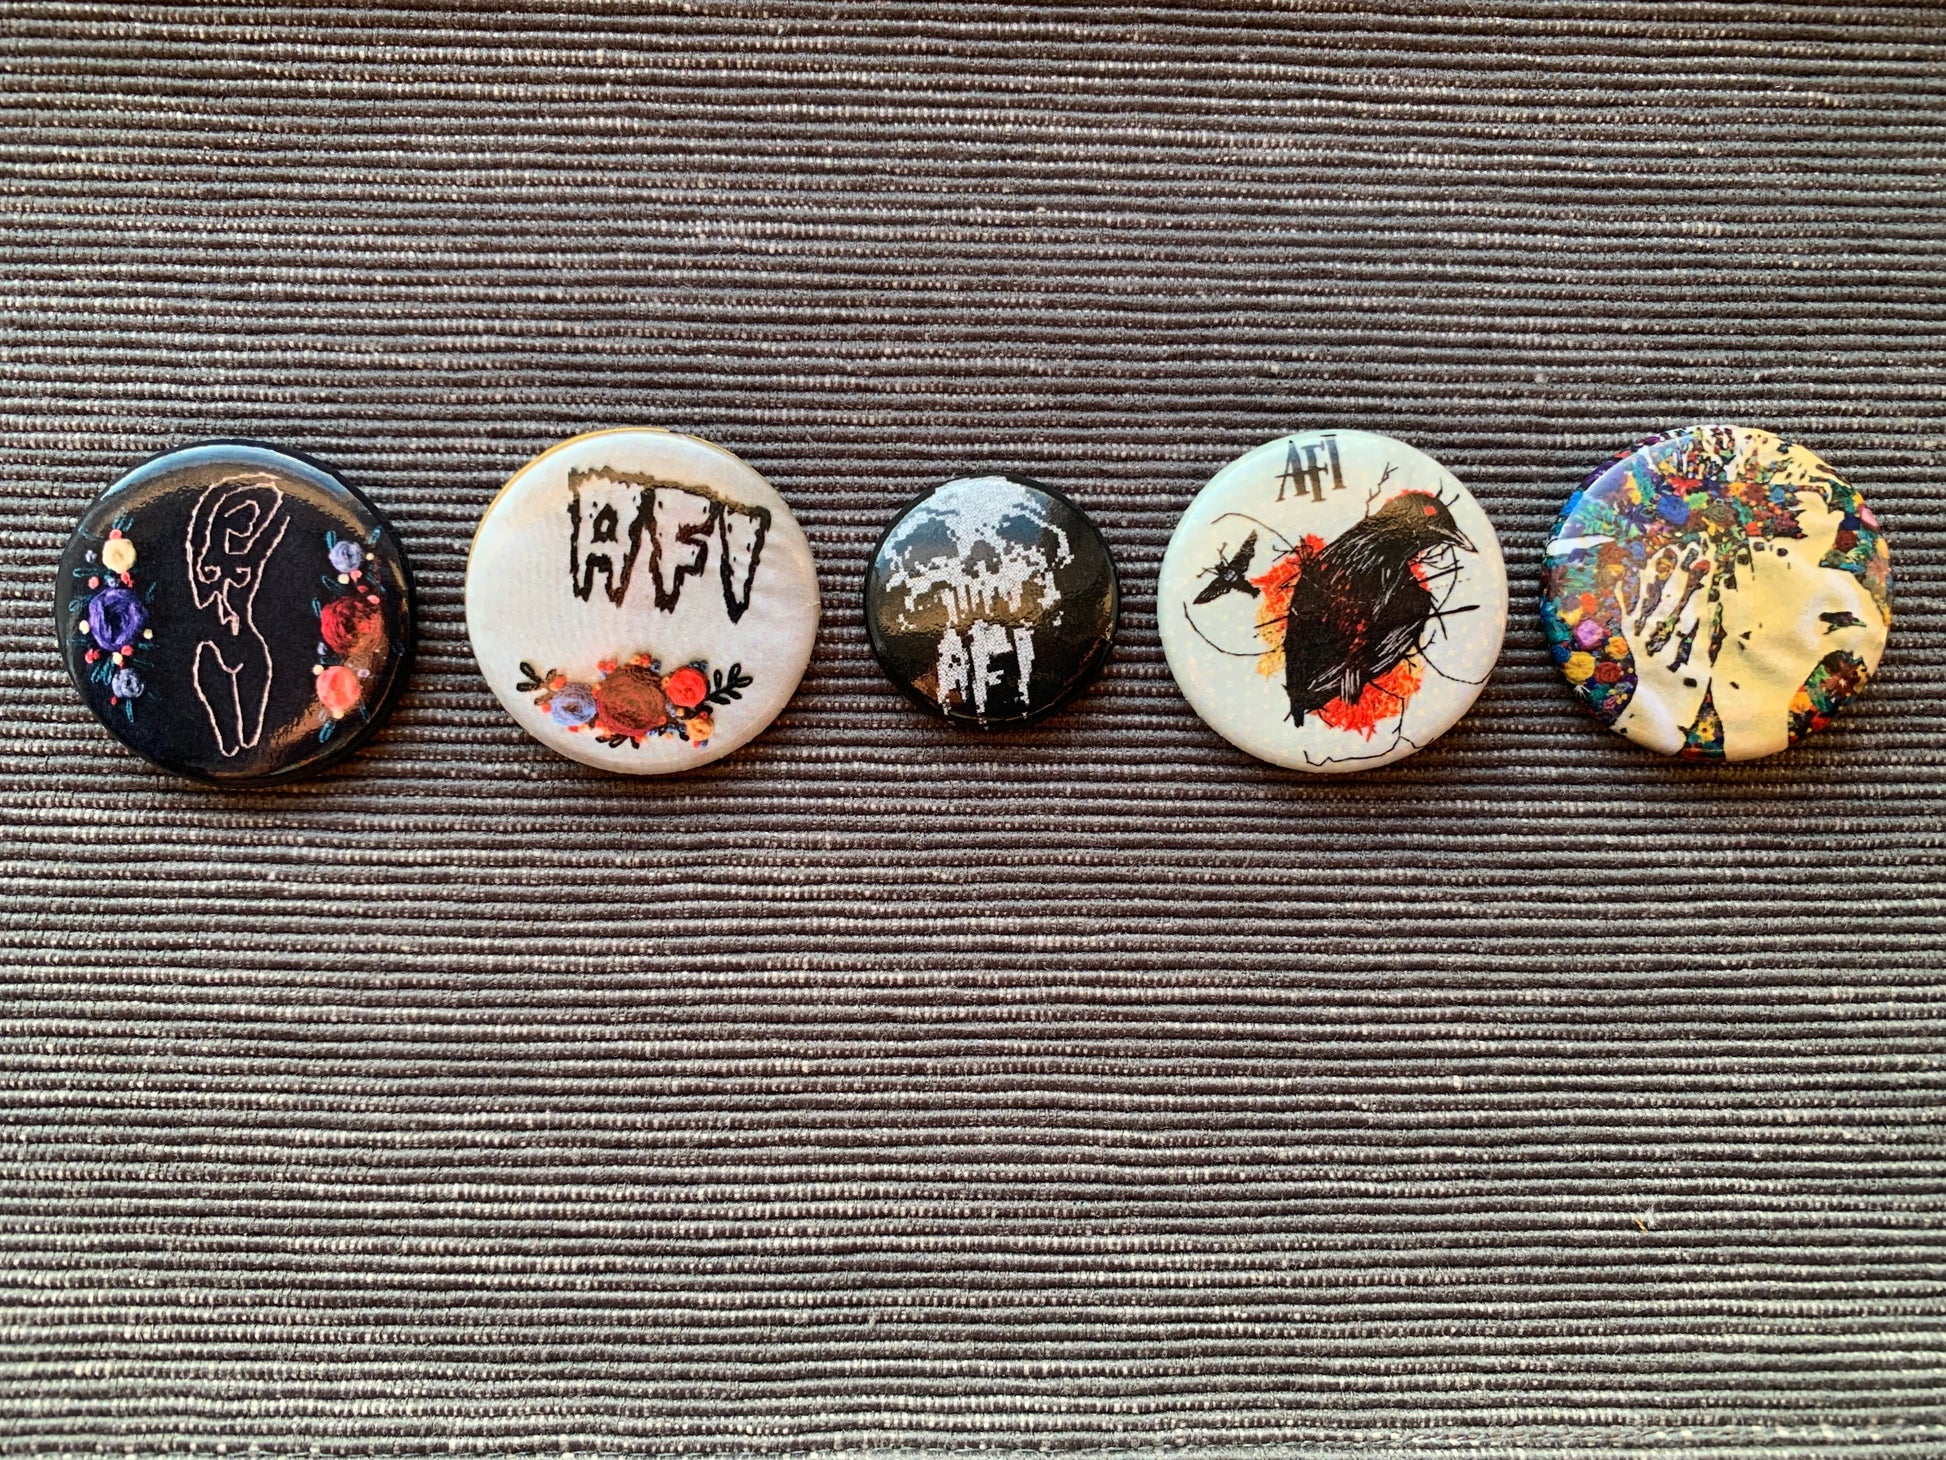 A set of pinback buttons, lined up in a horizontal row, against a grey textured background.